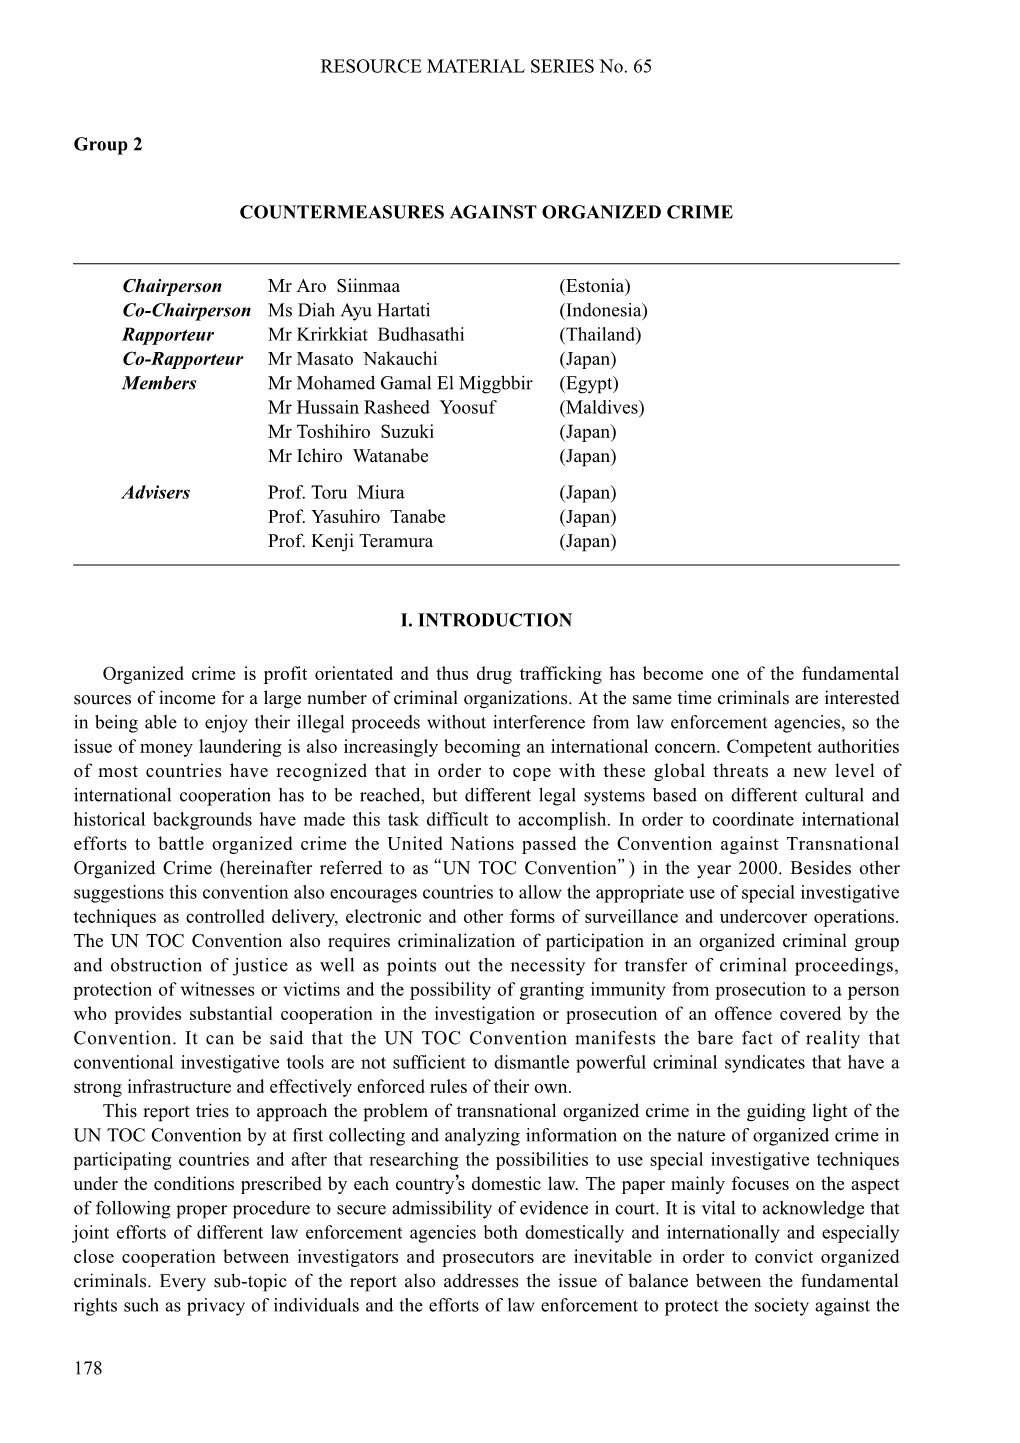 Countermeasures Against Organized Crime by Group 2 (PDF: 447KB)